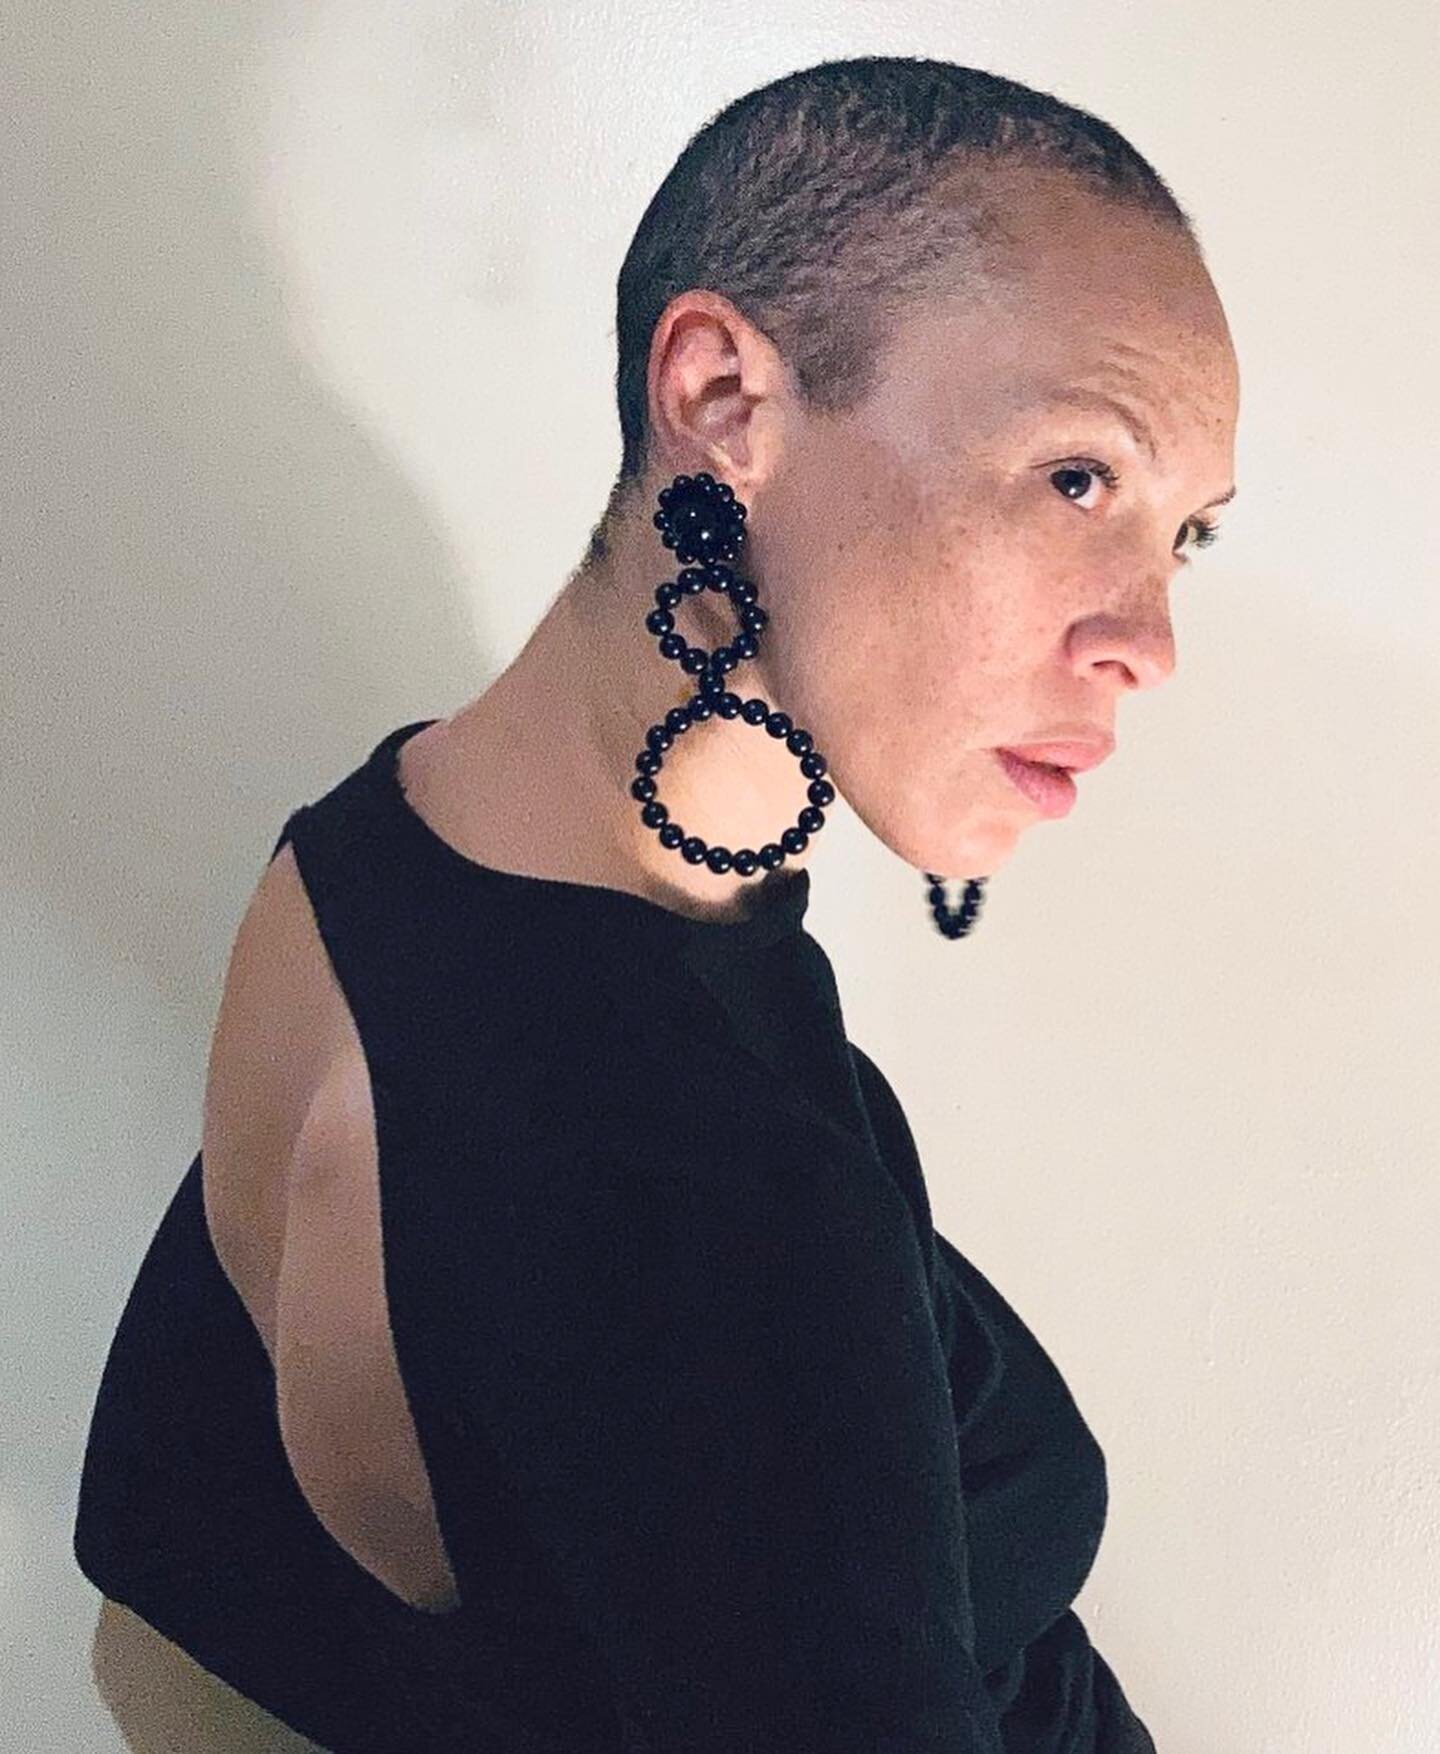 Statement wood earrings inspired by the femme fatales of 1960s Italian cinema. Handcrafted with ebony beads arranged in three graduated circles topped with a glossy vintage acrylic dome. Available in dark brown as well. Only two pairs currently avail